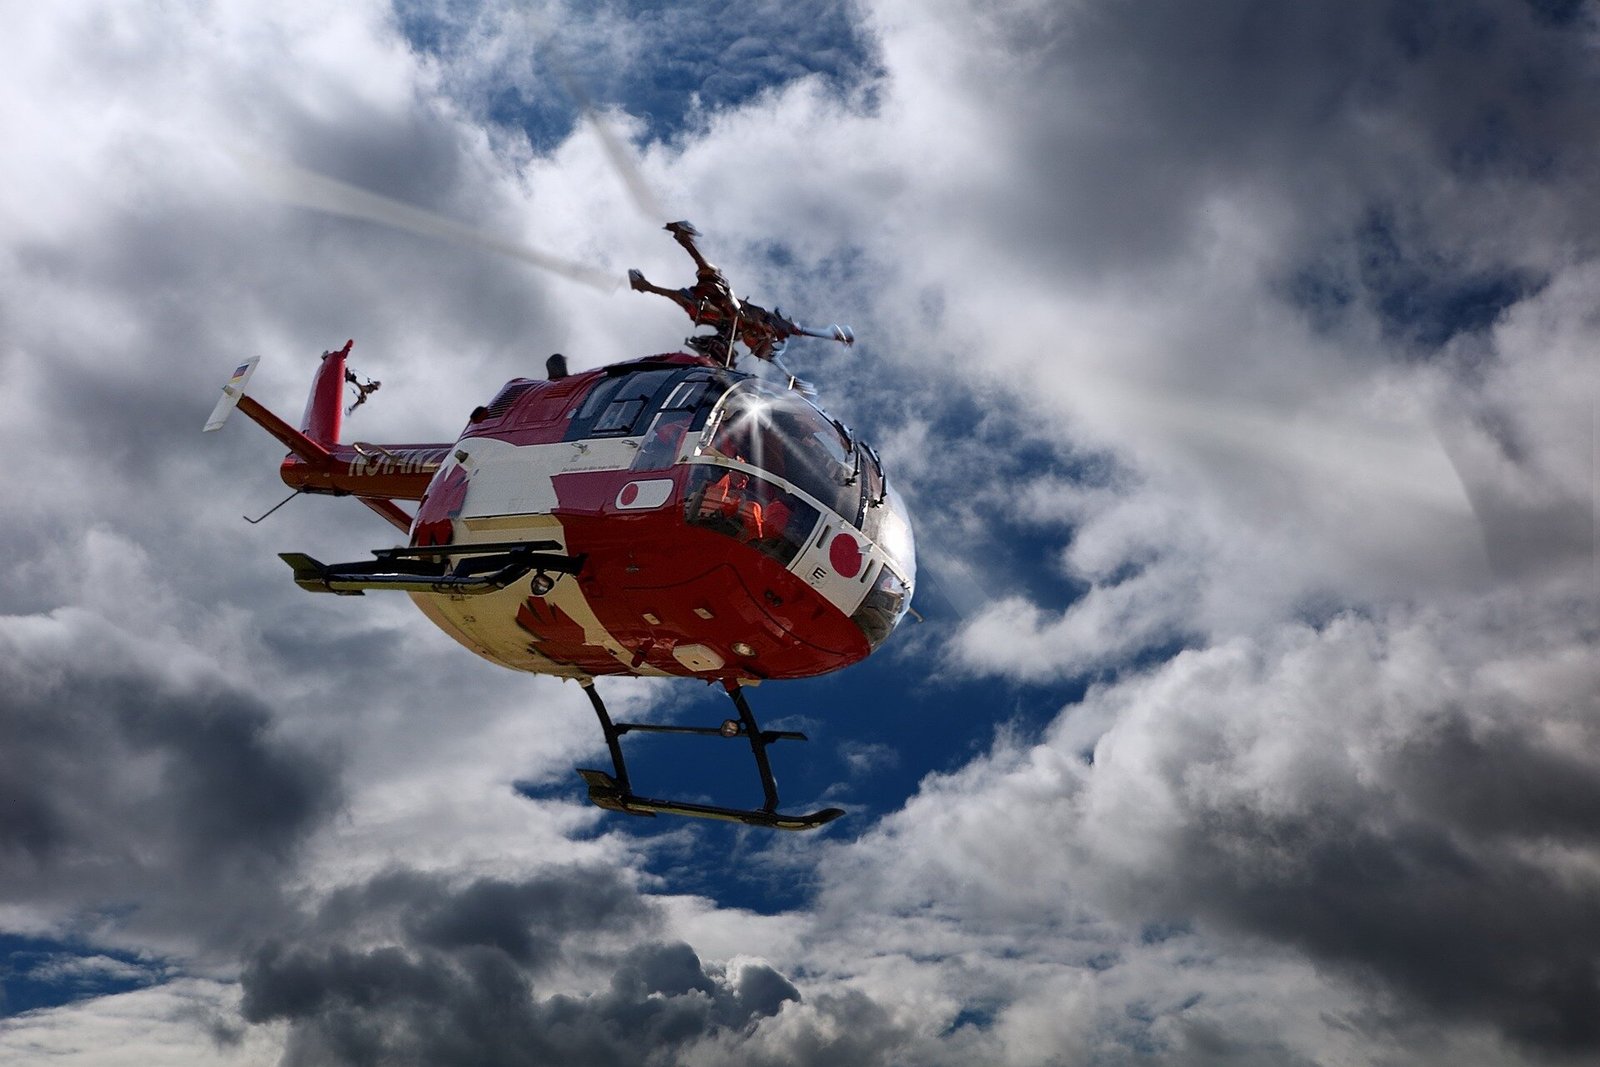 Without Medicare Part B’s shield, patient’s family owes $81,000 for a single air-ambulance flight